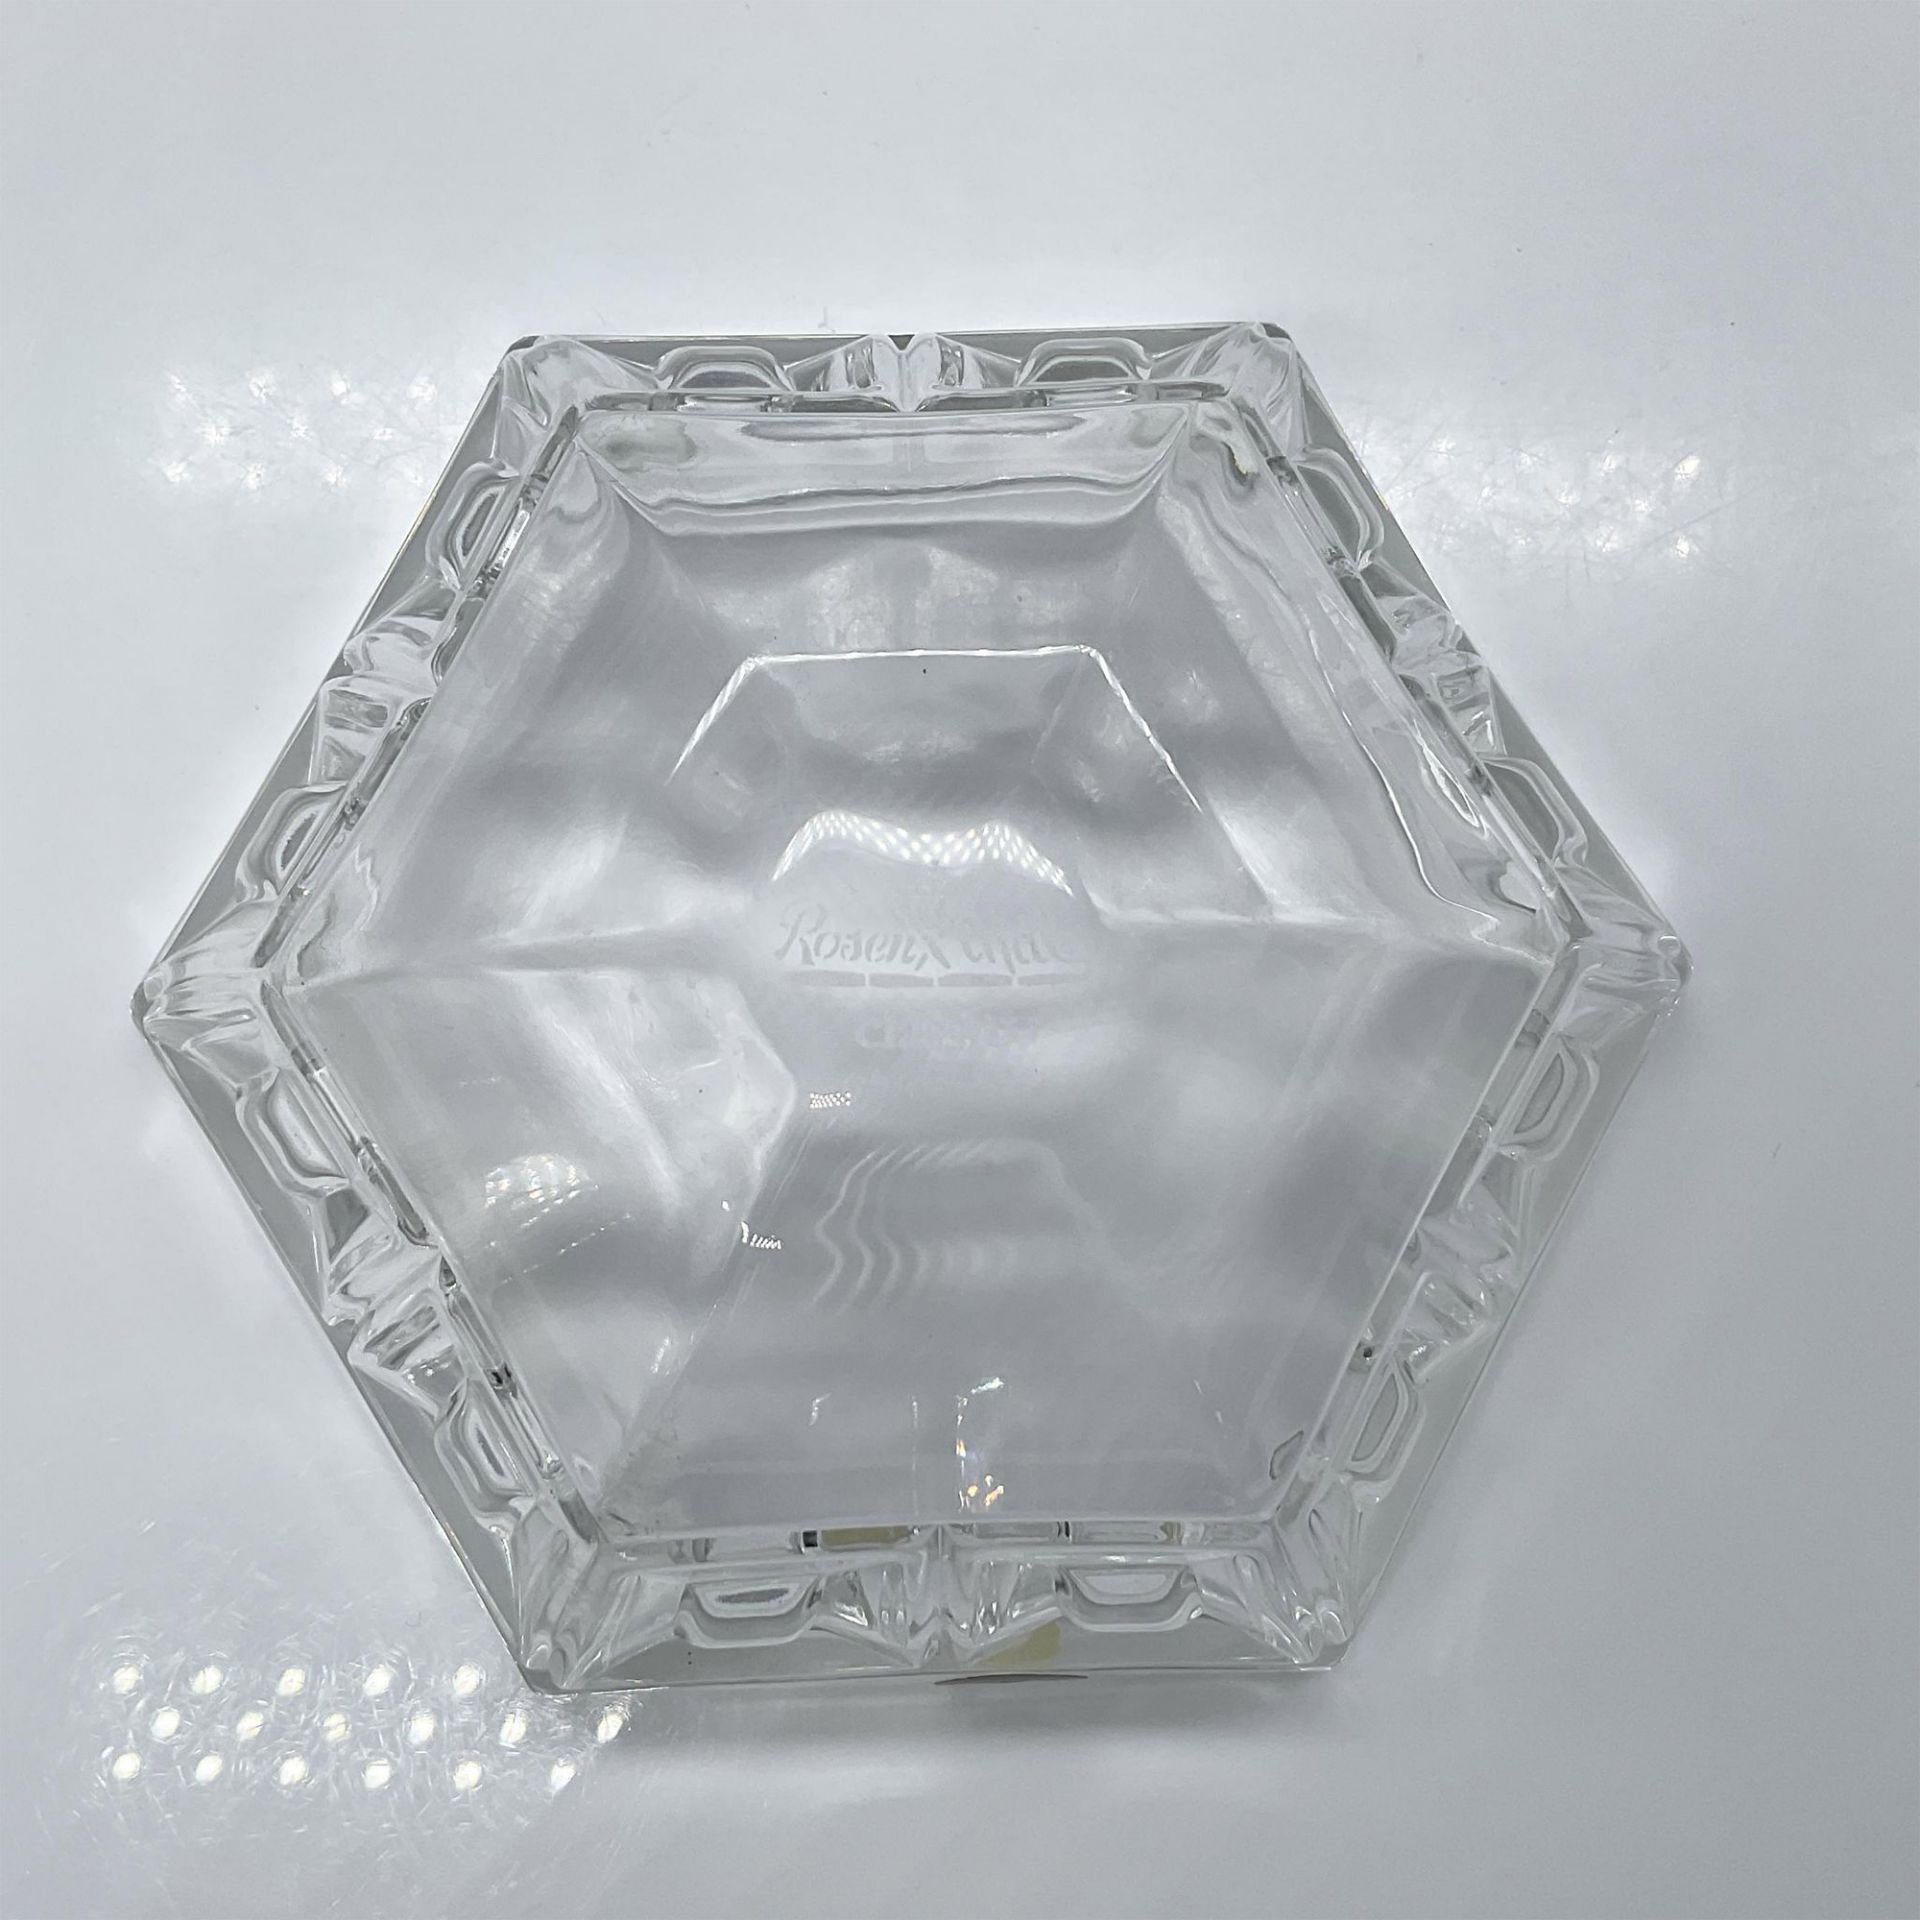 Rosenthal Lead Crystal Candy Bowl, Domus - Image 3 of 3